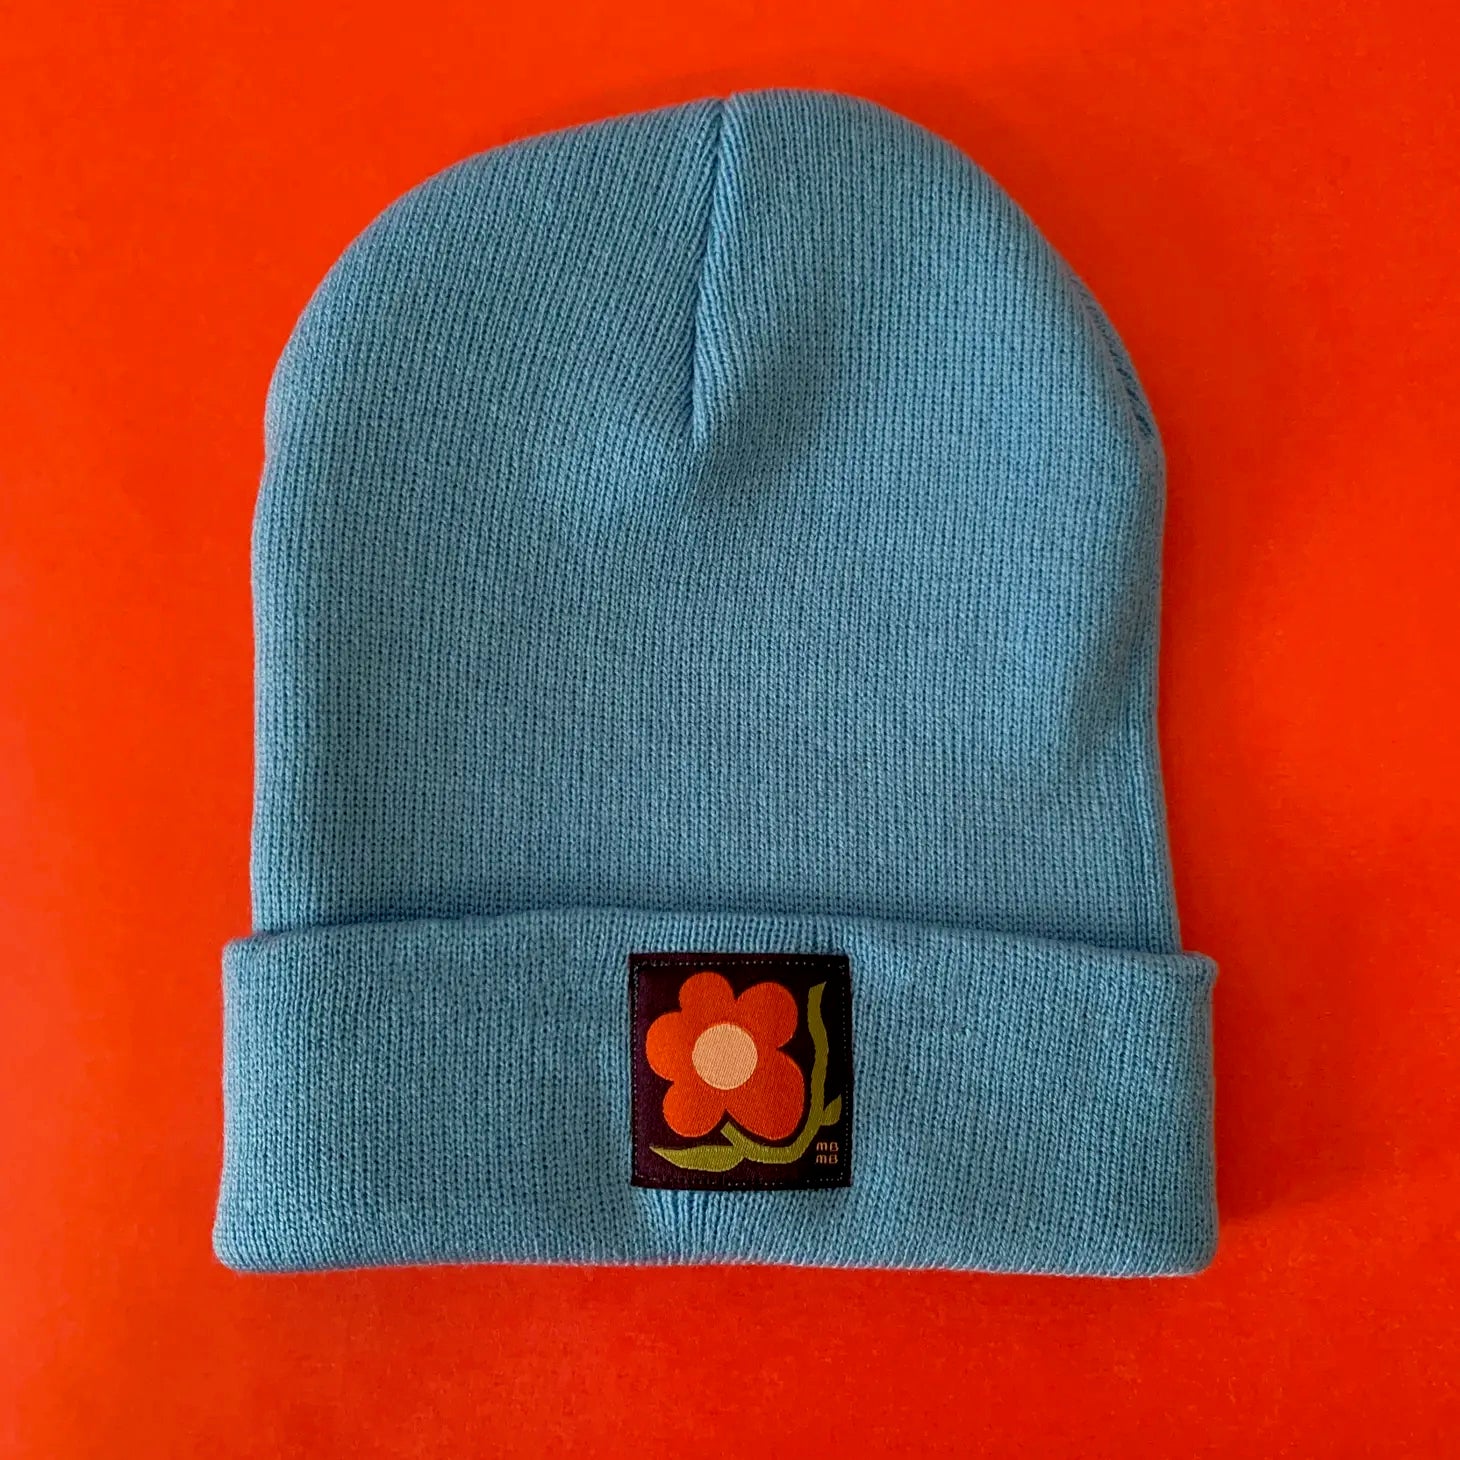 Beanies by MBMB